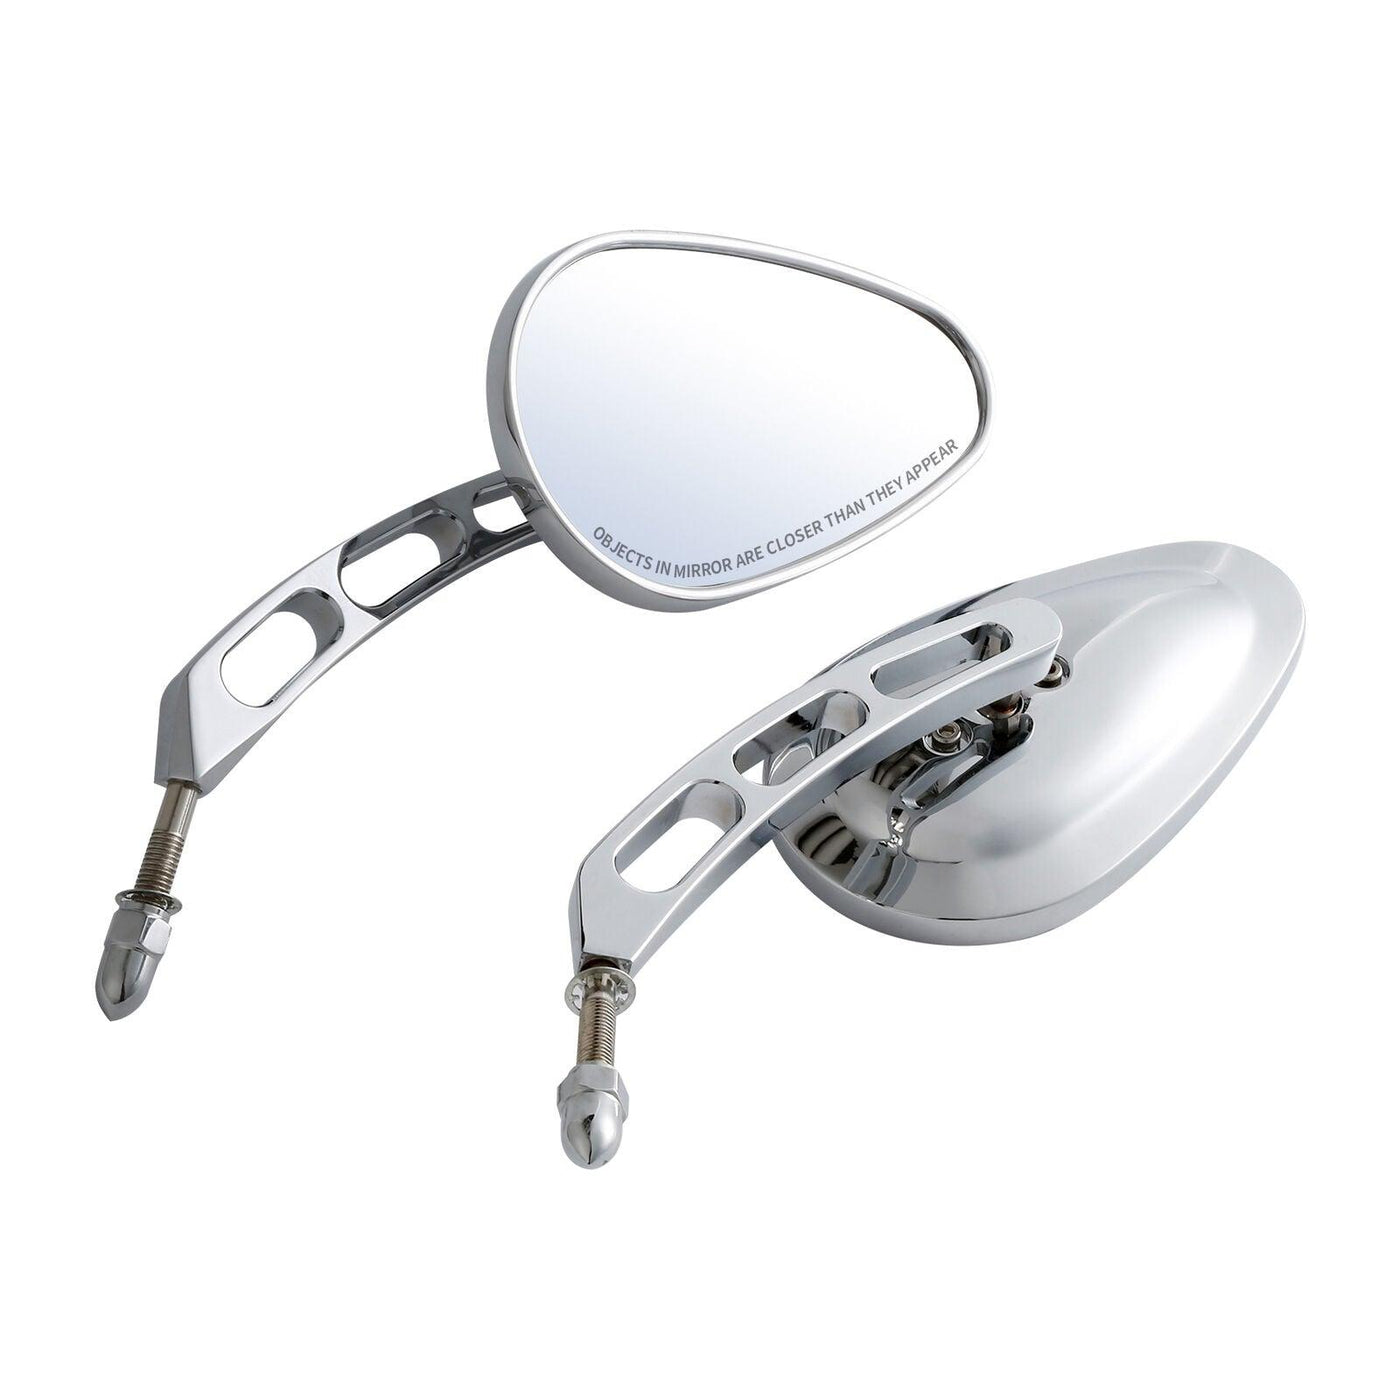 Chrome Rear-View Mirrors Fit For Harley Road Street Glide Sportster Dyna Softail - Moto Life Products